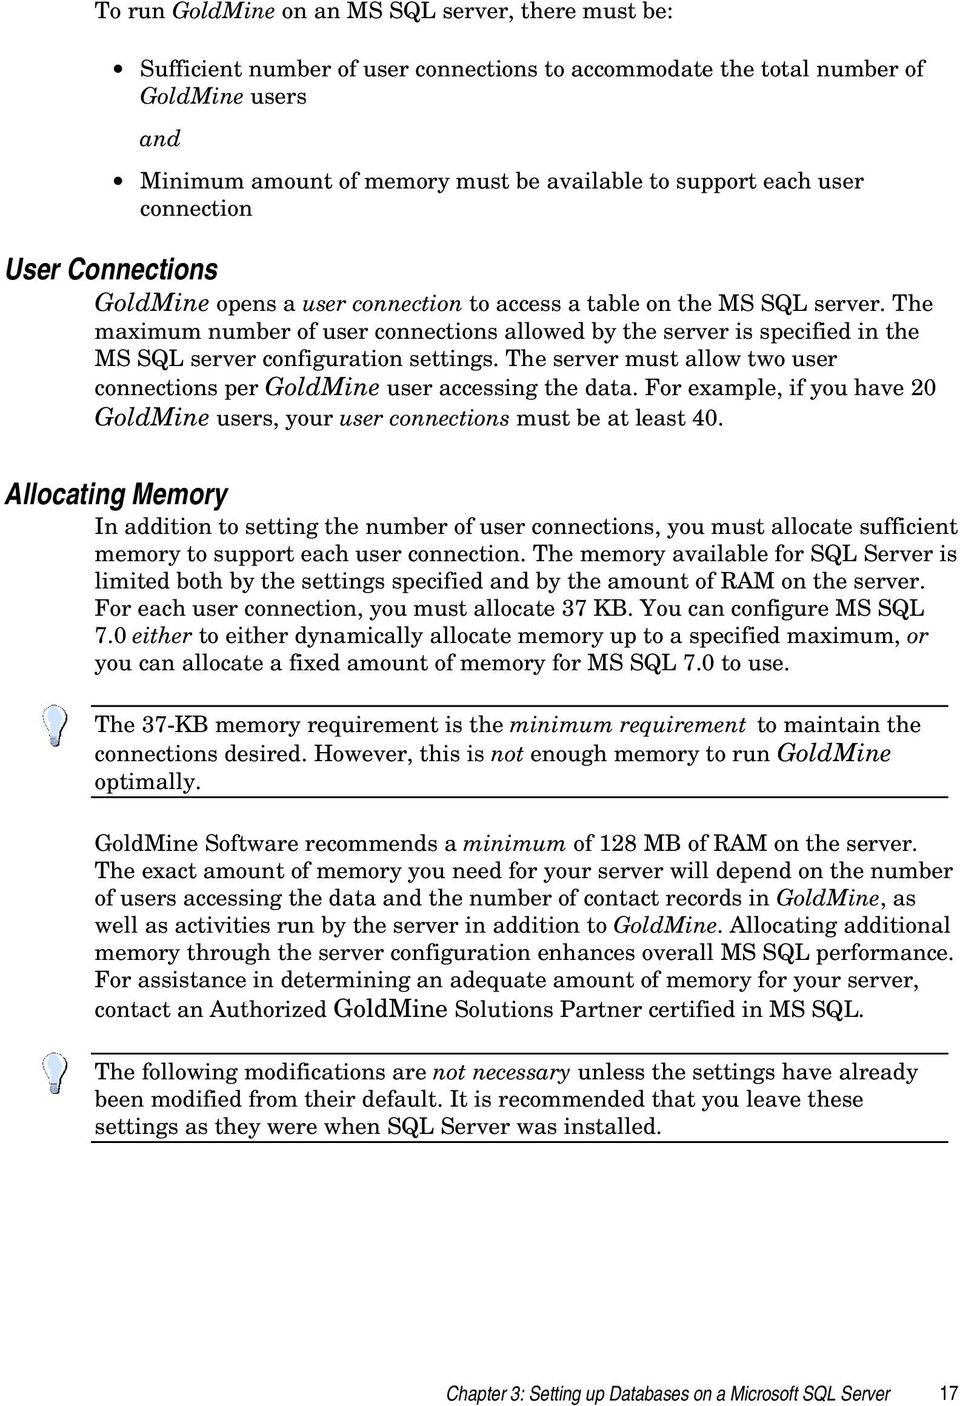 The maximum number of user connections allowed by the server is specified in the MS SQL server configuration settings. The server must allow two user connections per GoldMine user accessing the data.